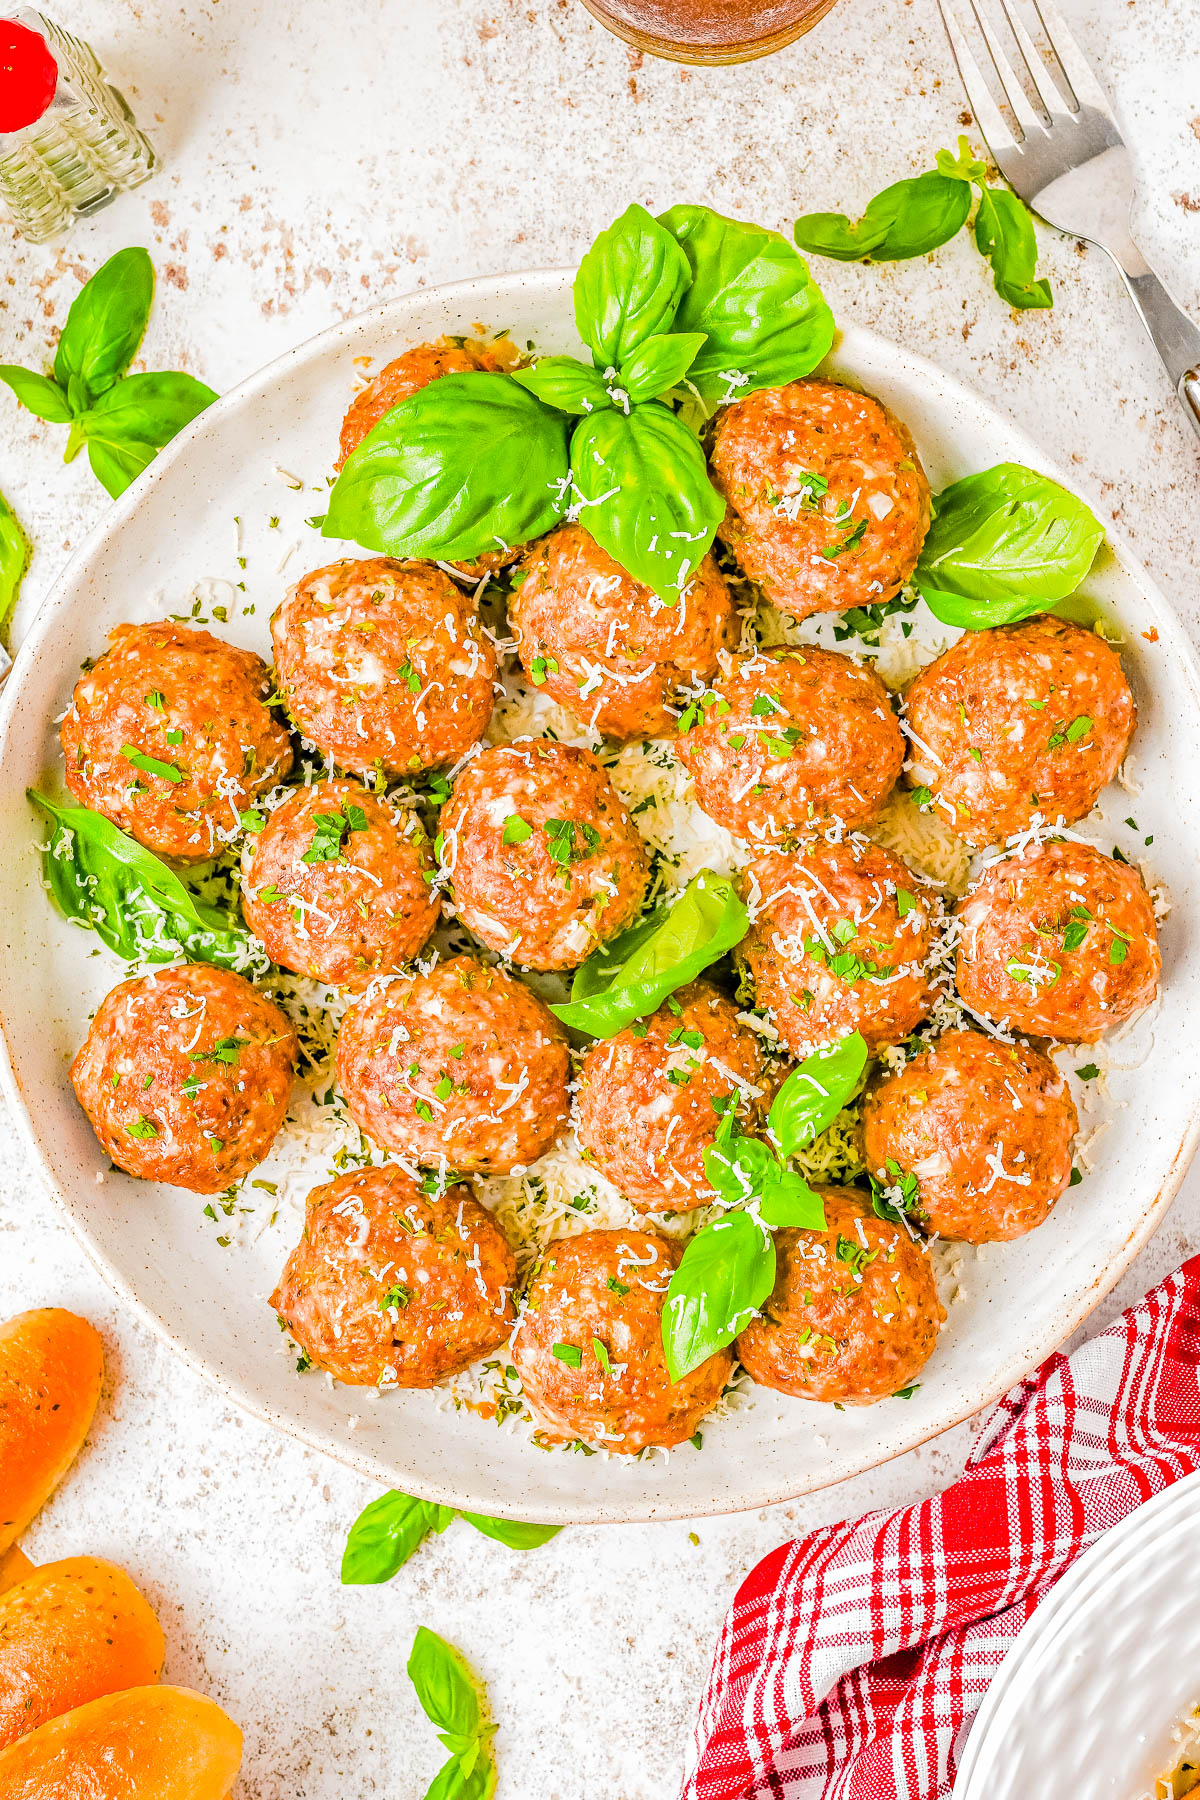 Baked Italian Meatballs — Ready in just 30 minutes, these quick and EASY baked meatballs come out perfectly moist and tender every time! There’s no need to brown the meatballs before baking, which cuts back on dishes and saves time! These are the BEST Italian meatballs for spaghetti, subs, casseroles, and more! 